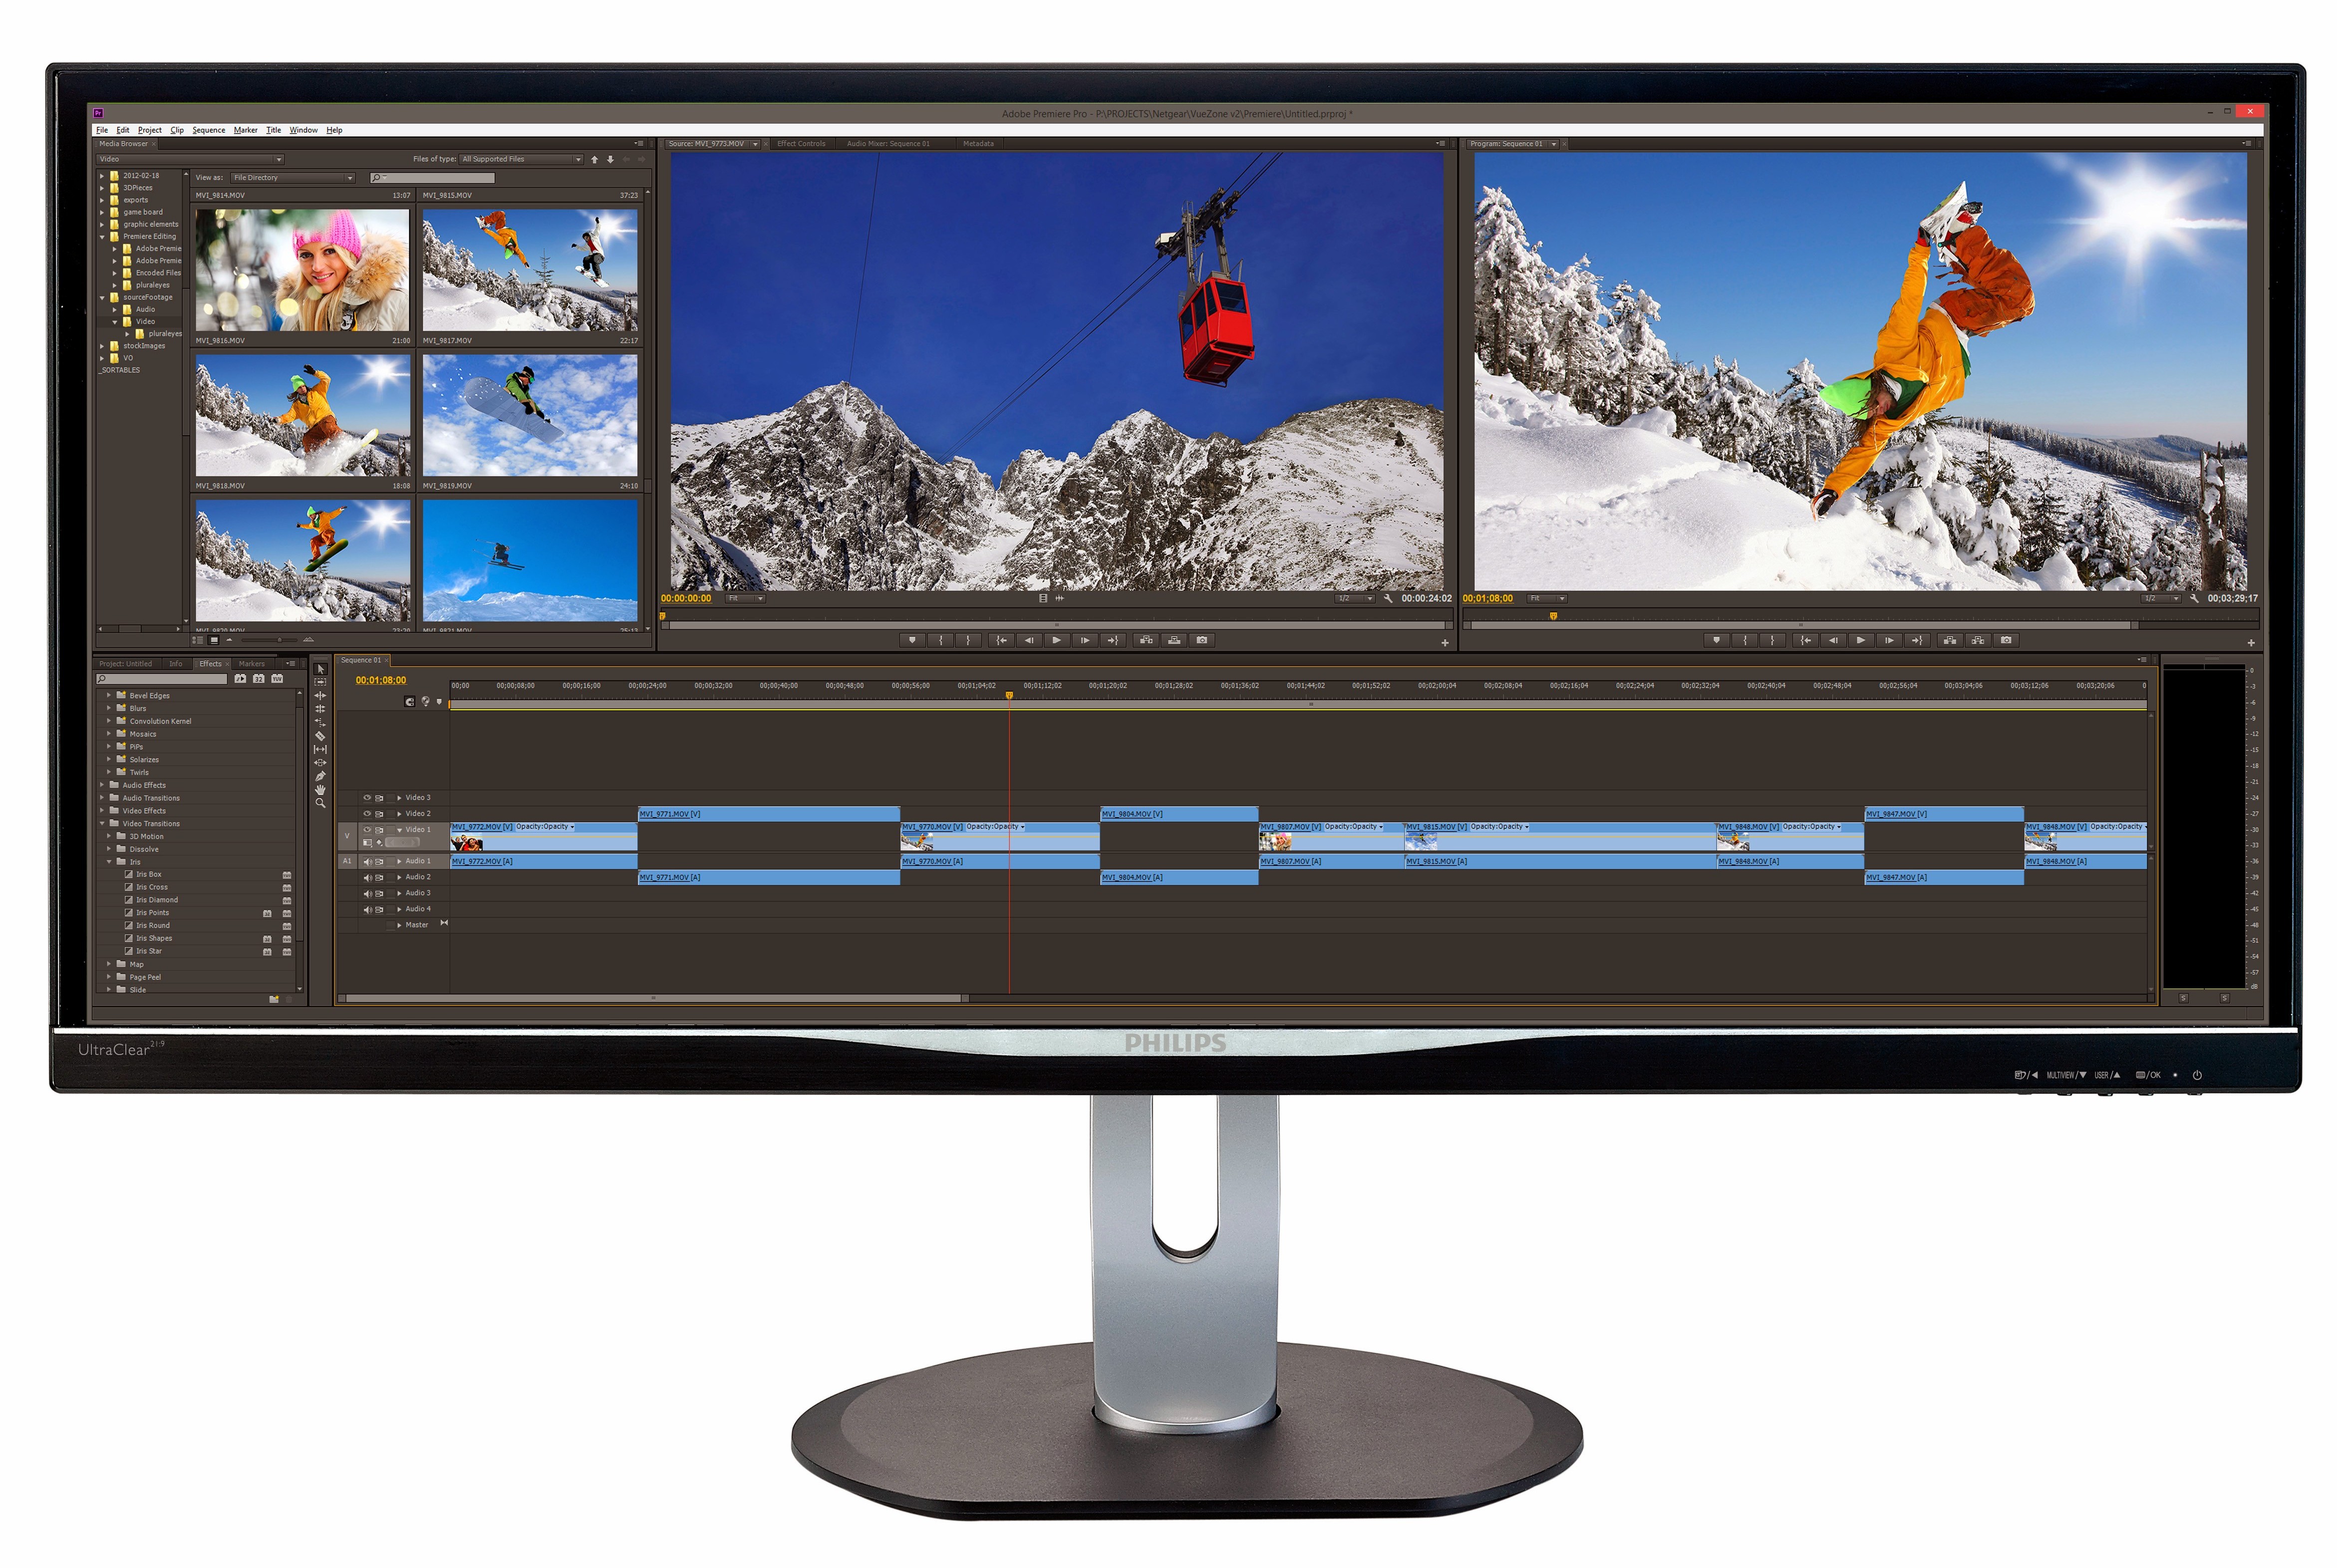 Carelessness Breeding Derivation Philips Intros BDM3470UP 34-inch 21:9 Monitor | TechPowerUp